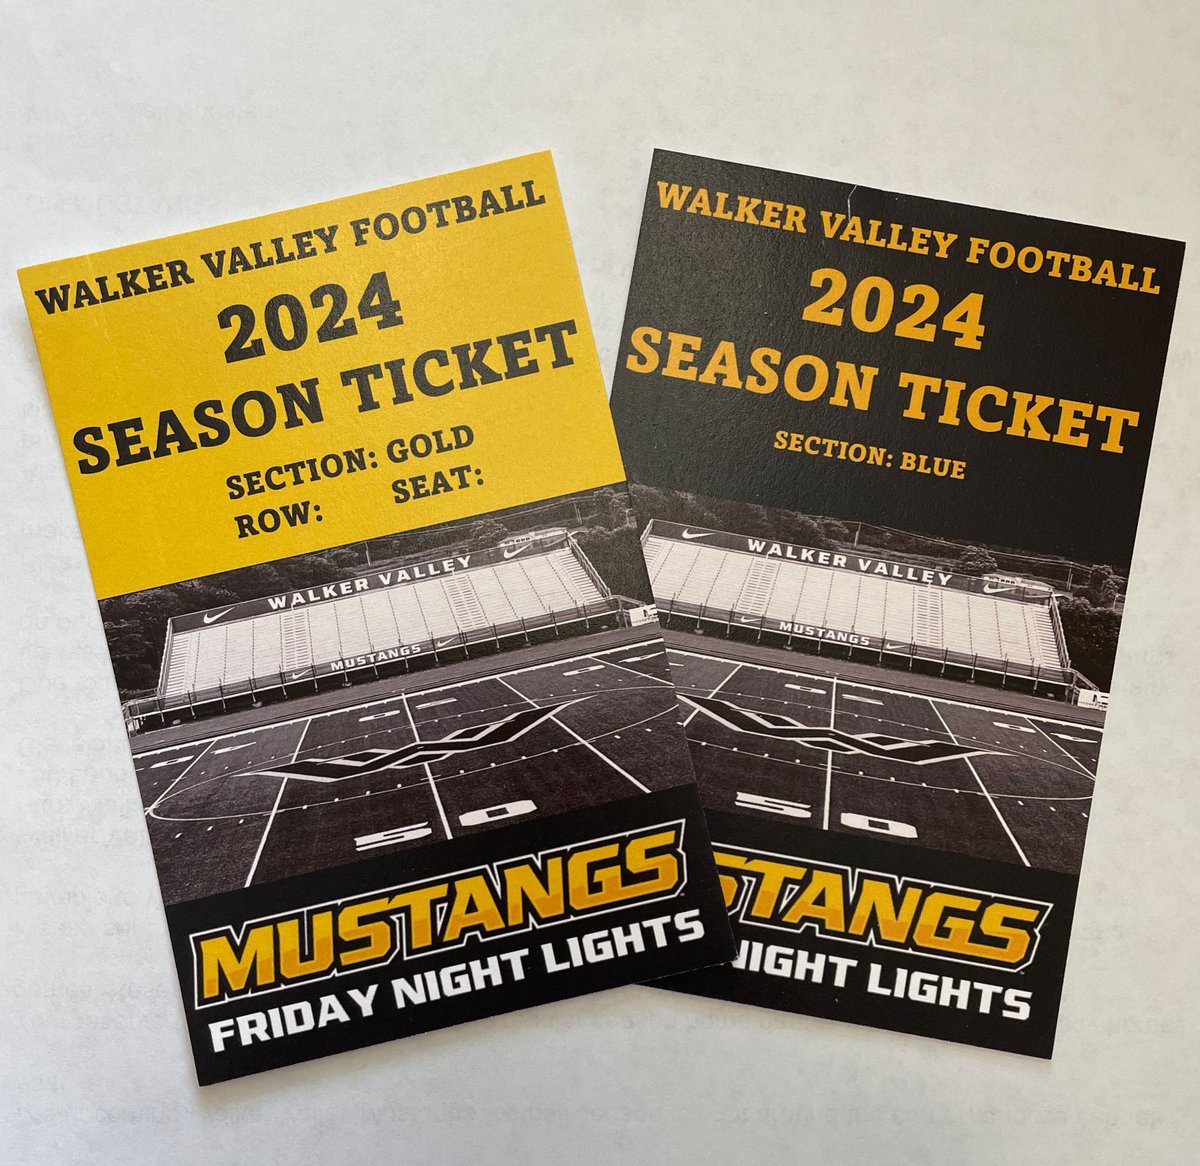 🏈ATTENTION MUSTANG FANS!!!🏈 Reserved seat reservation letters are going out TODAY. Be ready to renew! Don’t have tickets yet? If you want to be the first to know when they are available, please email walkervalleyfootballboosters@gmail.com to get on the waiting list.